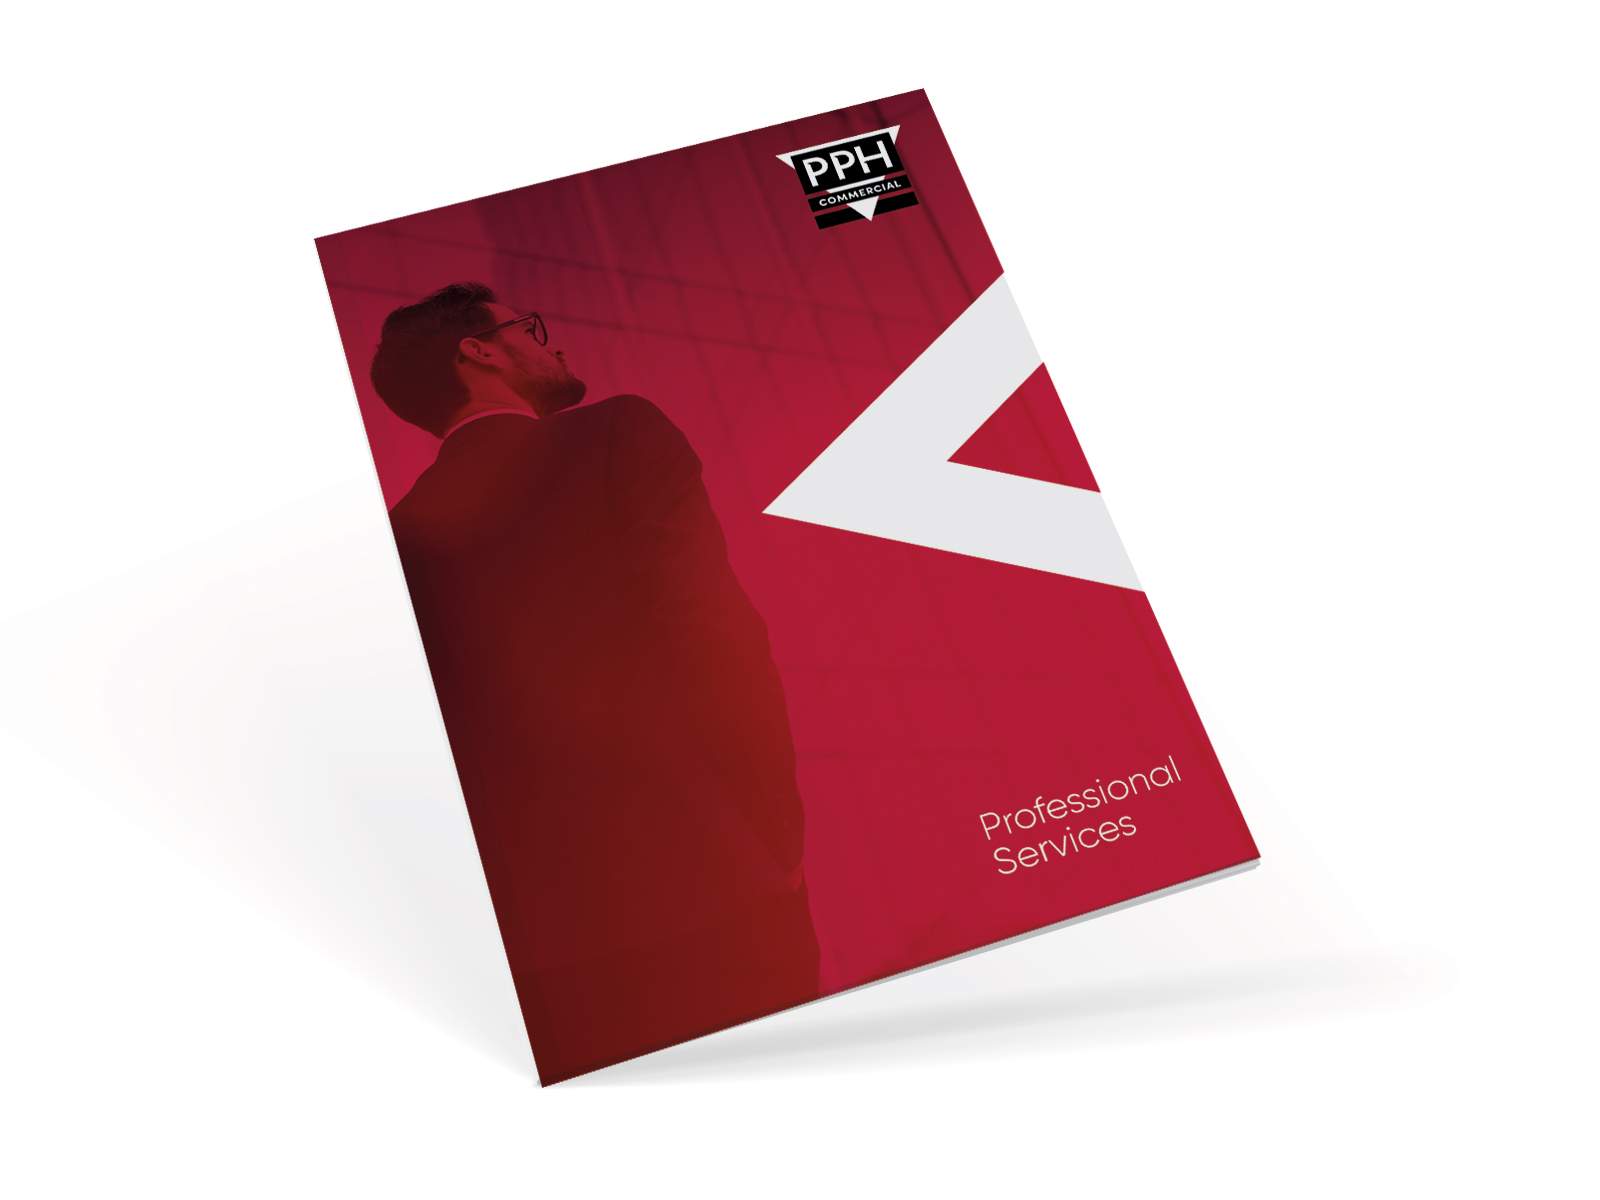 Download Our Professional Services Brochure